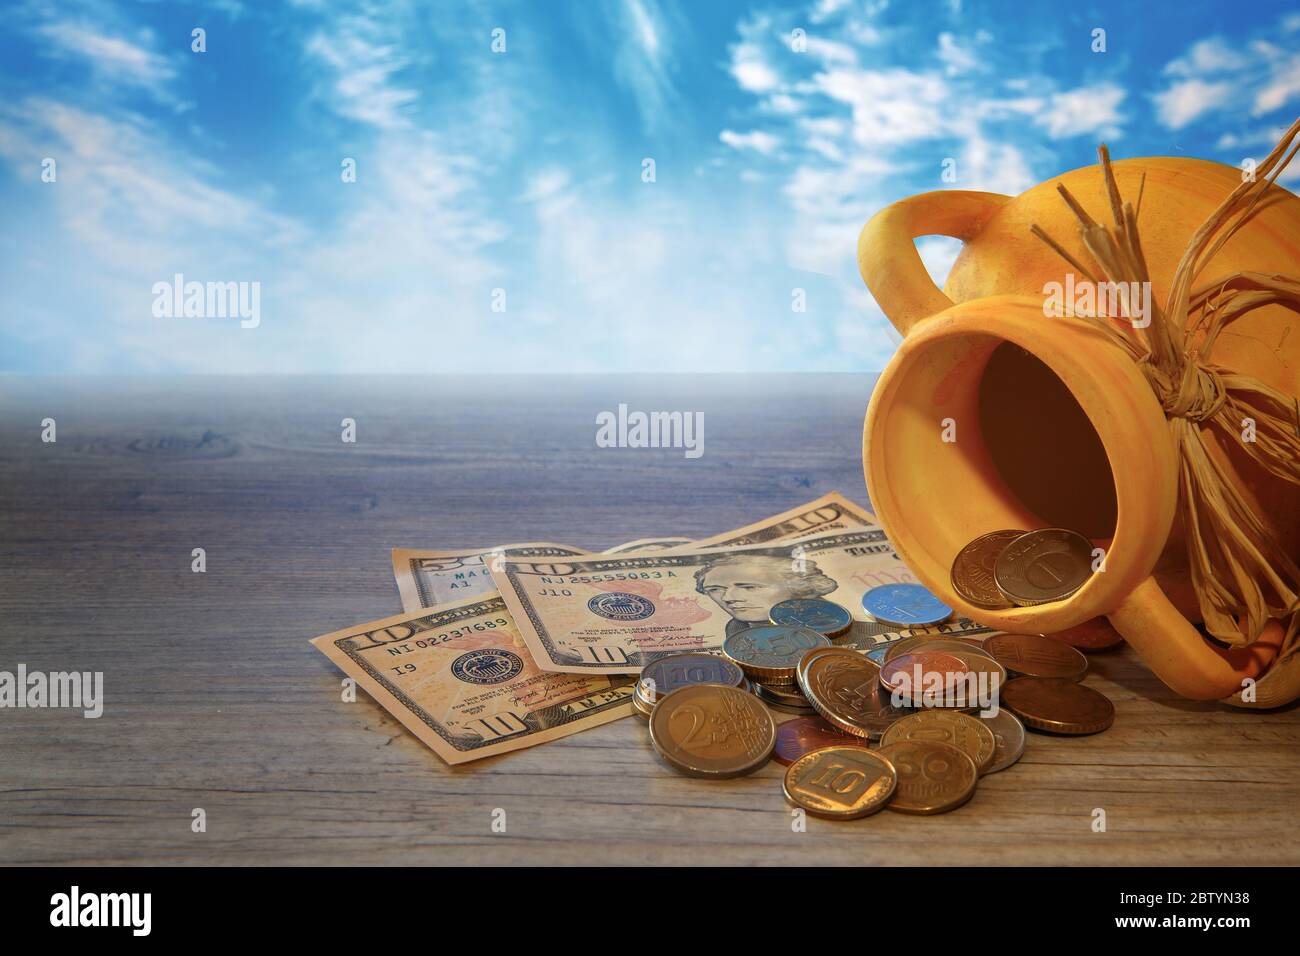 Money and coins of different countries scattered from the jug. Stock Photo